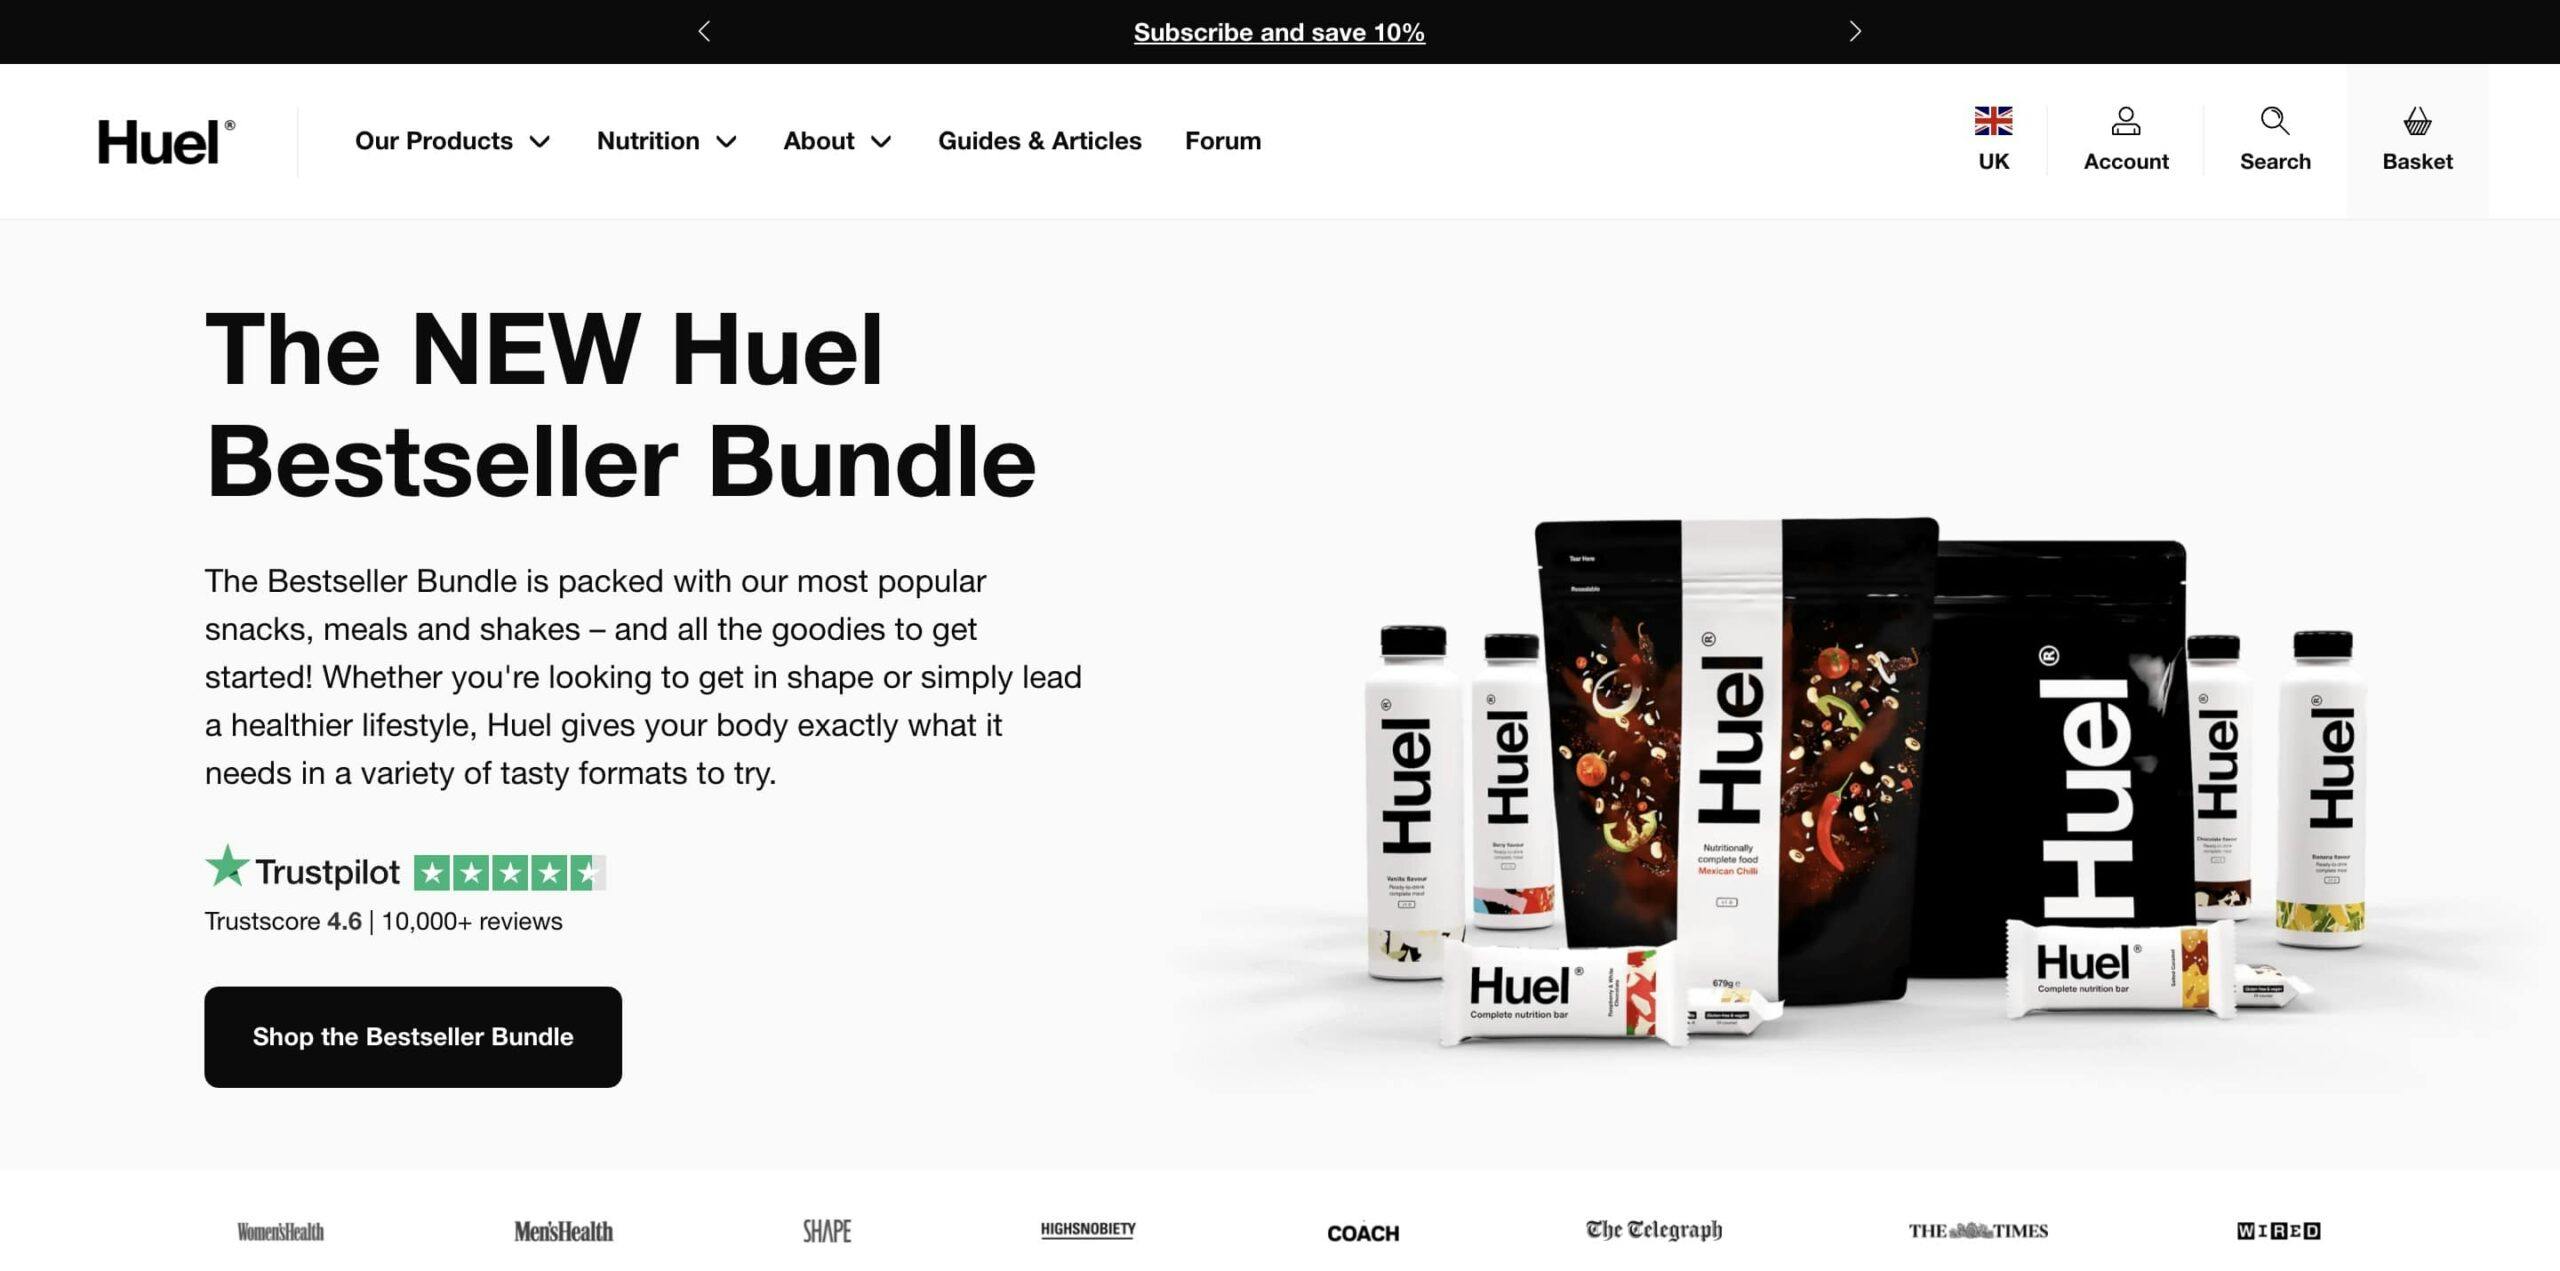 Huel home page with bestseller bundle offer, using social proof, bandwagon, and anchoring tactics.